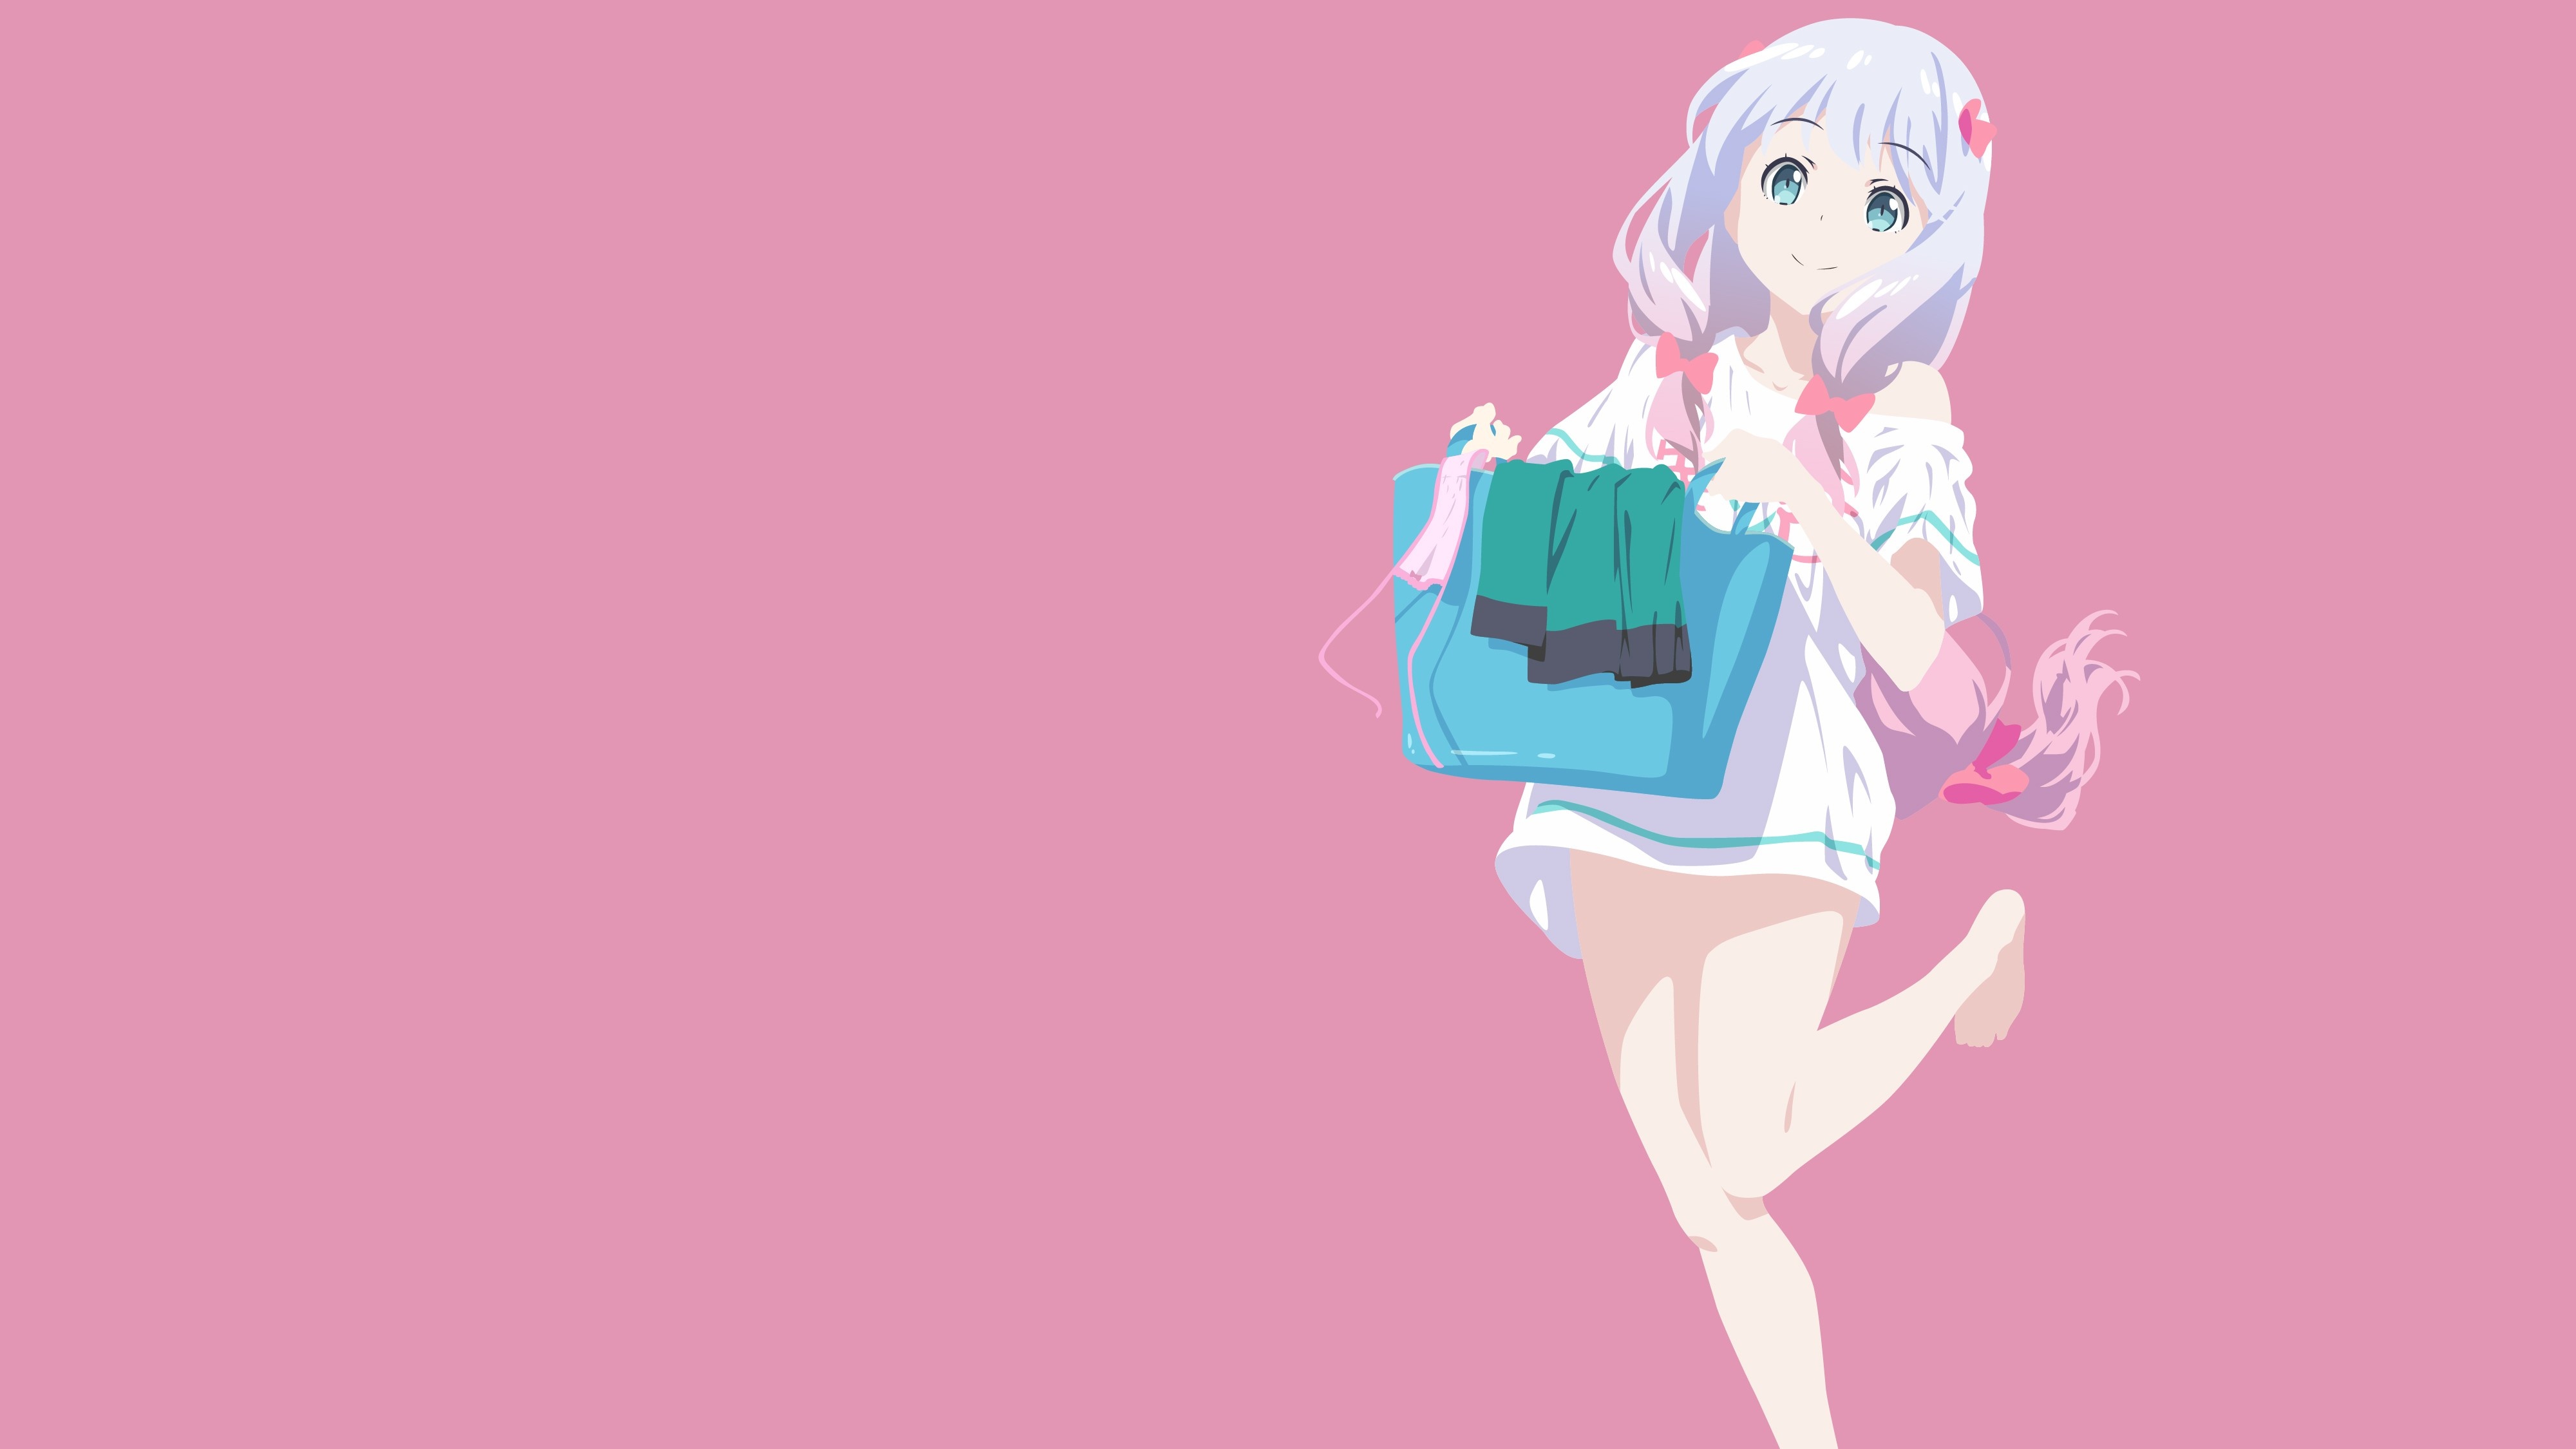 Anime Character hd background